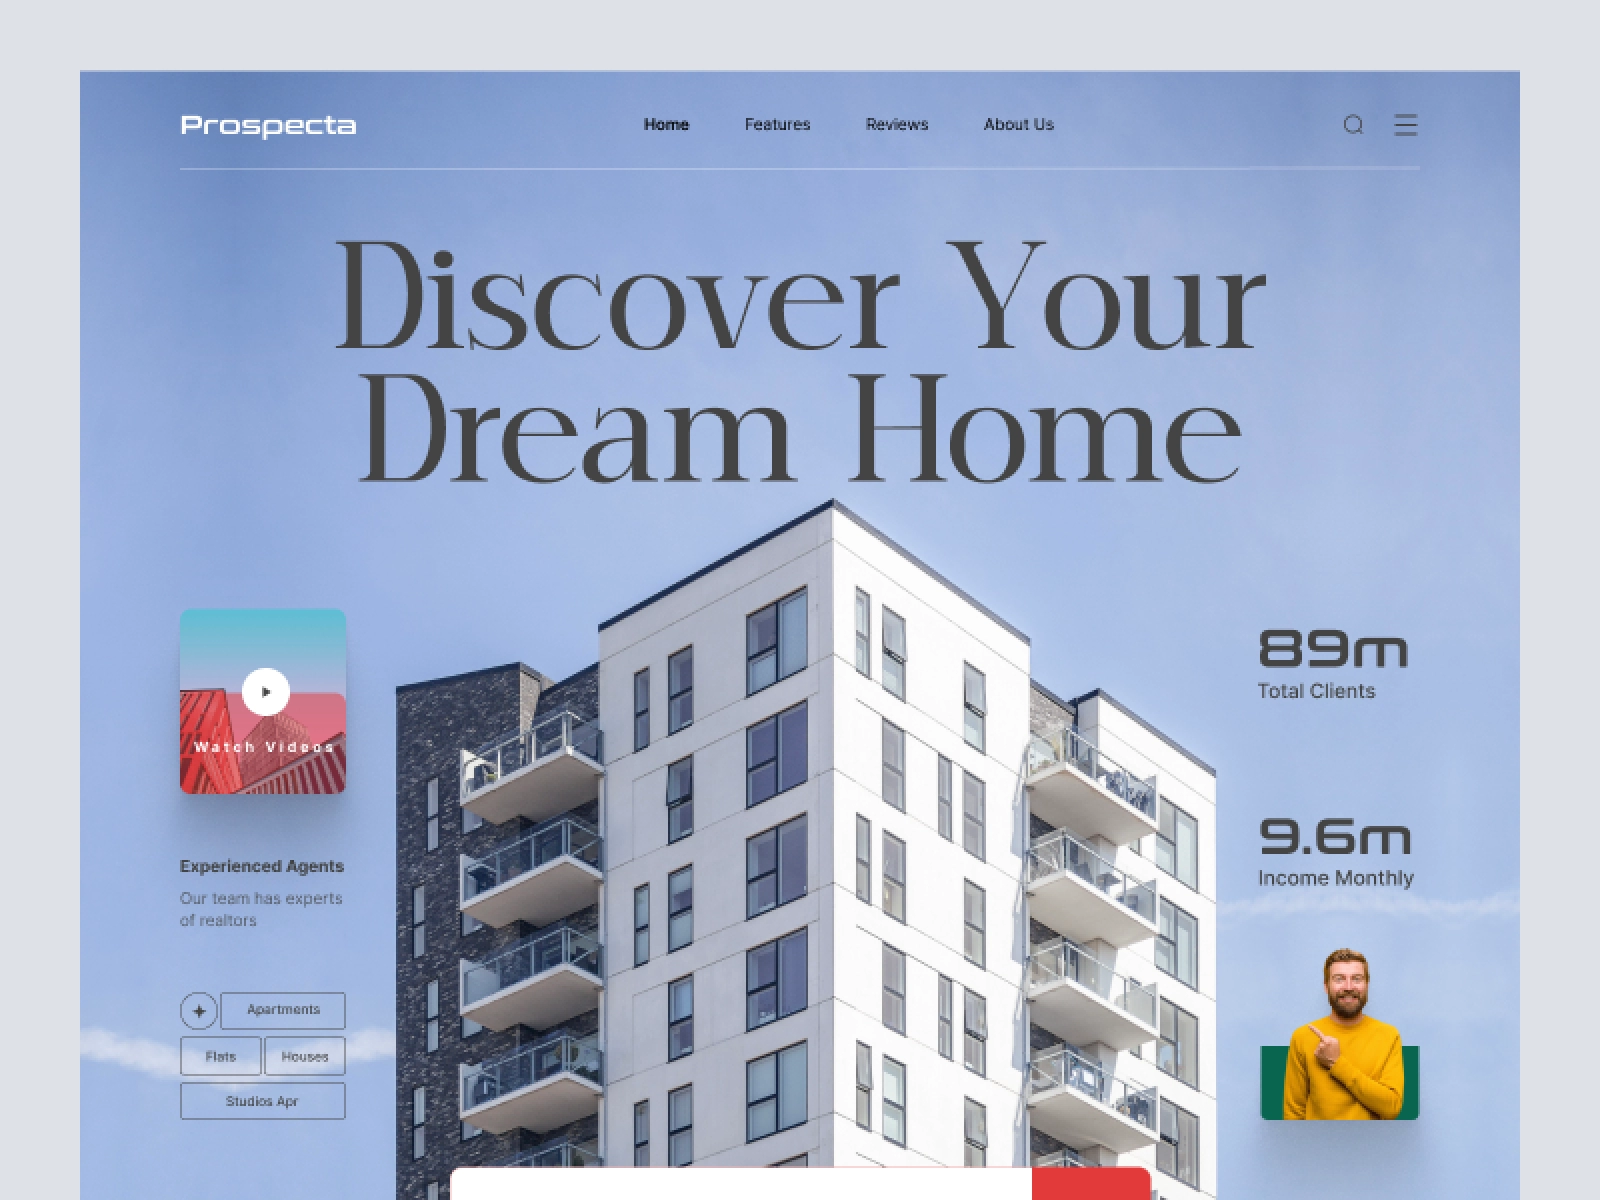 Prospects - Real Estate Website Homepage for Figma and Adobe XD - screen 1